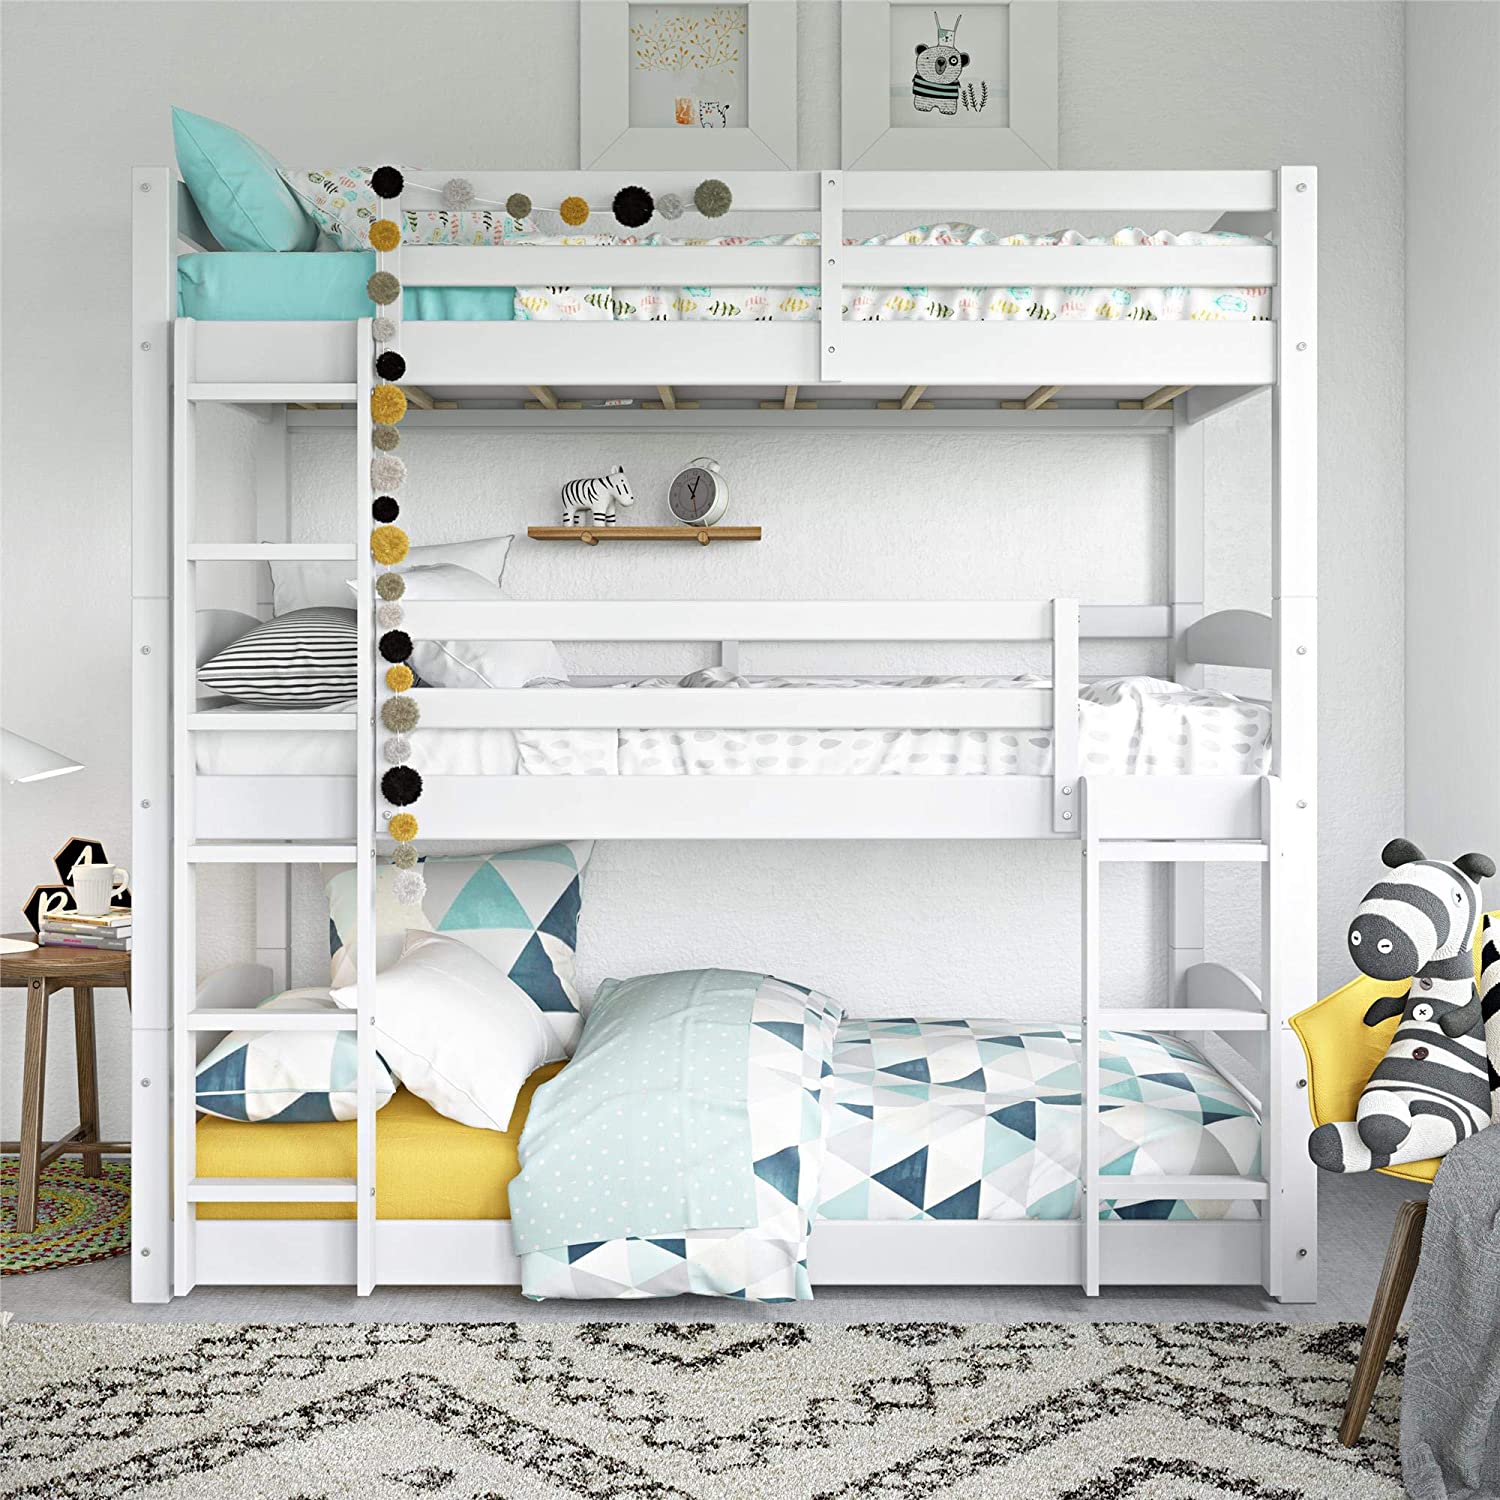 26 Bunk Beds You Ll Want For Yourself, 3 Bed Bunk Beds For Kids